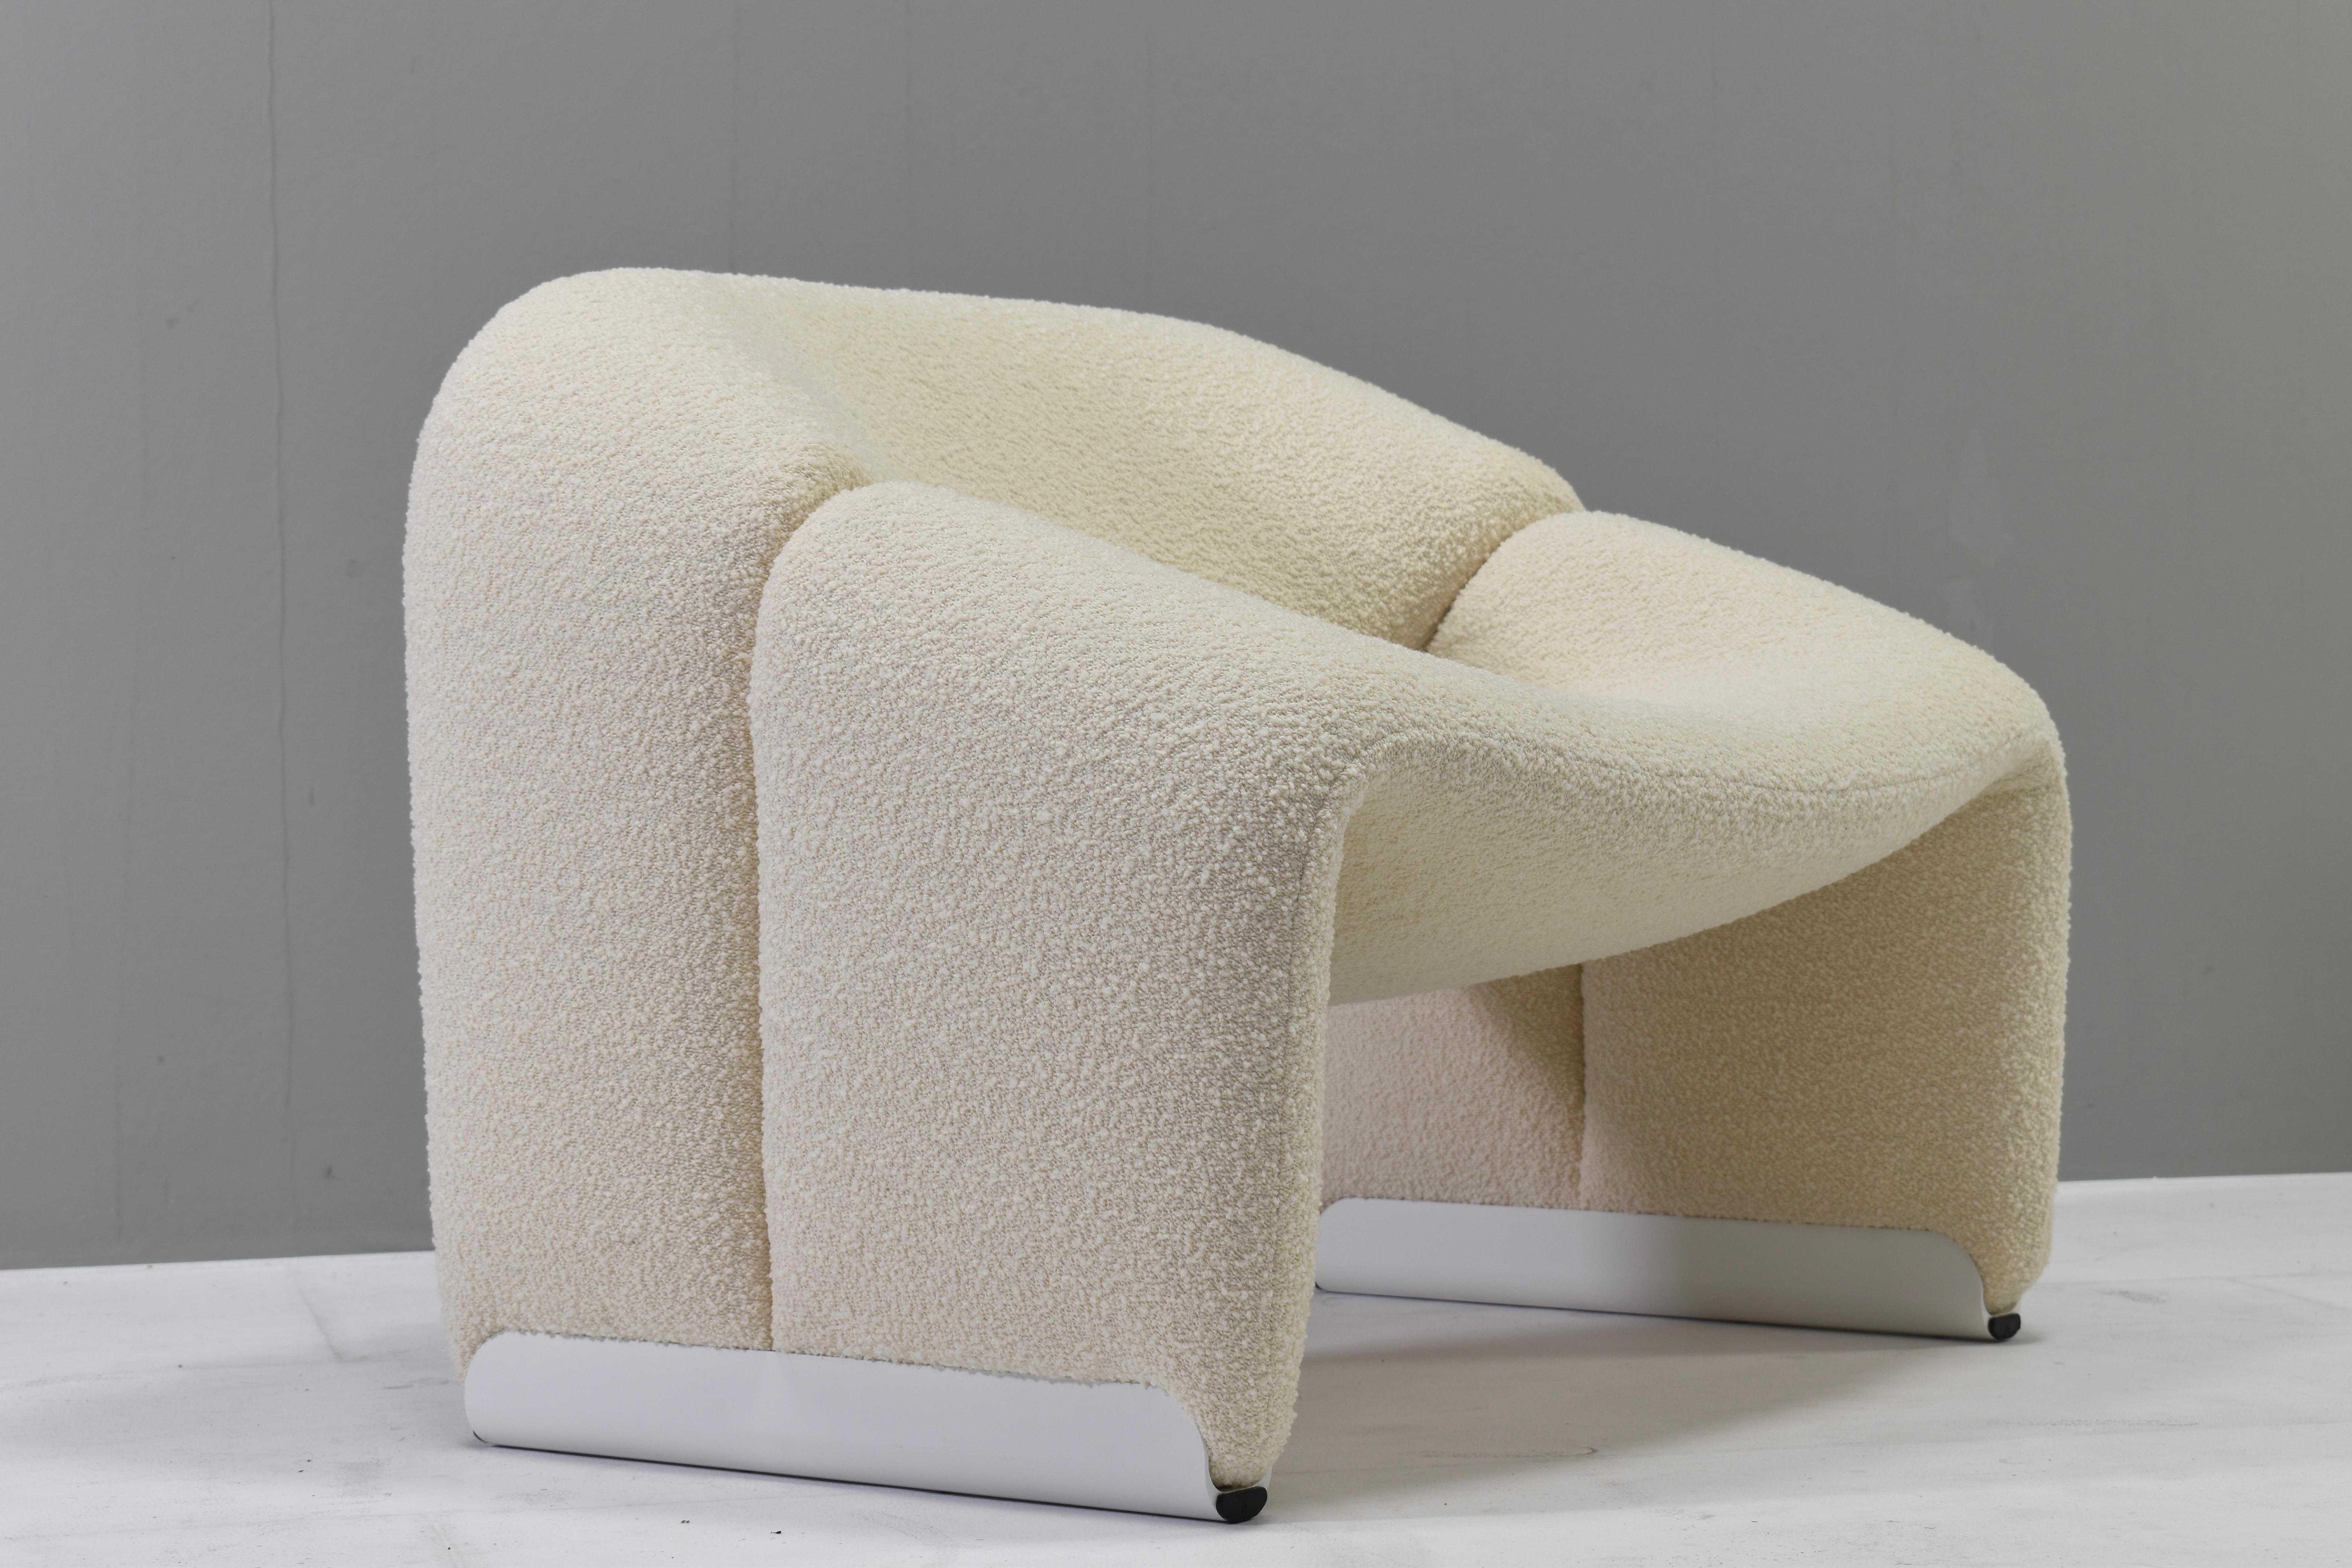 Late 20th Century Pair of Pierre Paulin F598 Groovy Armchairs for Artifort in New Upholstery, 1972